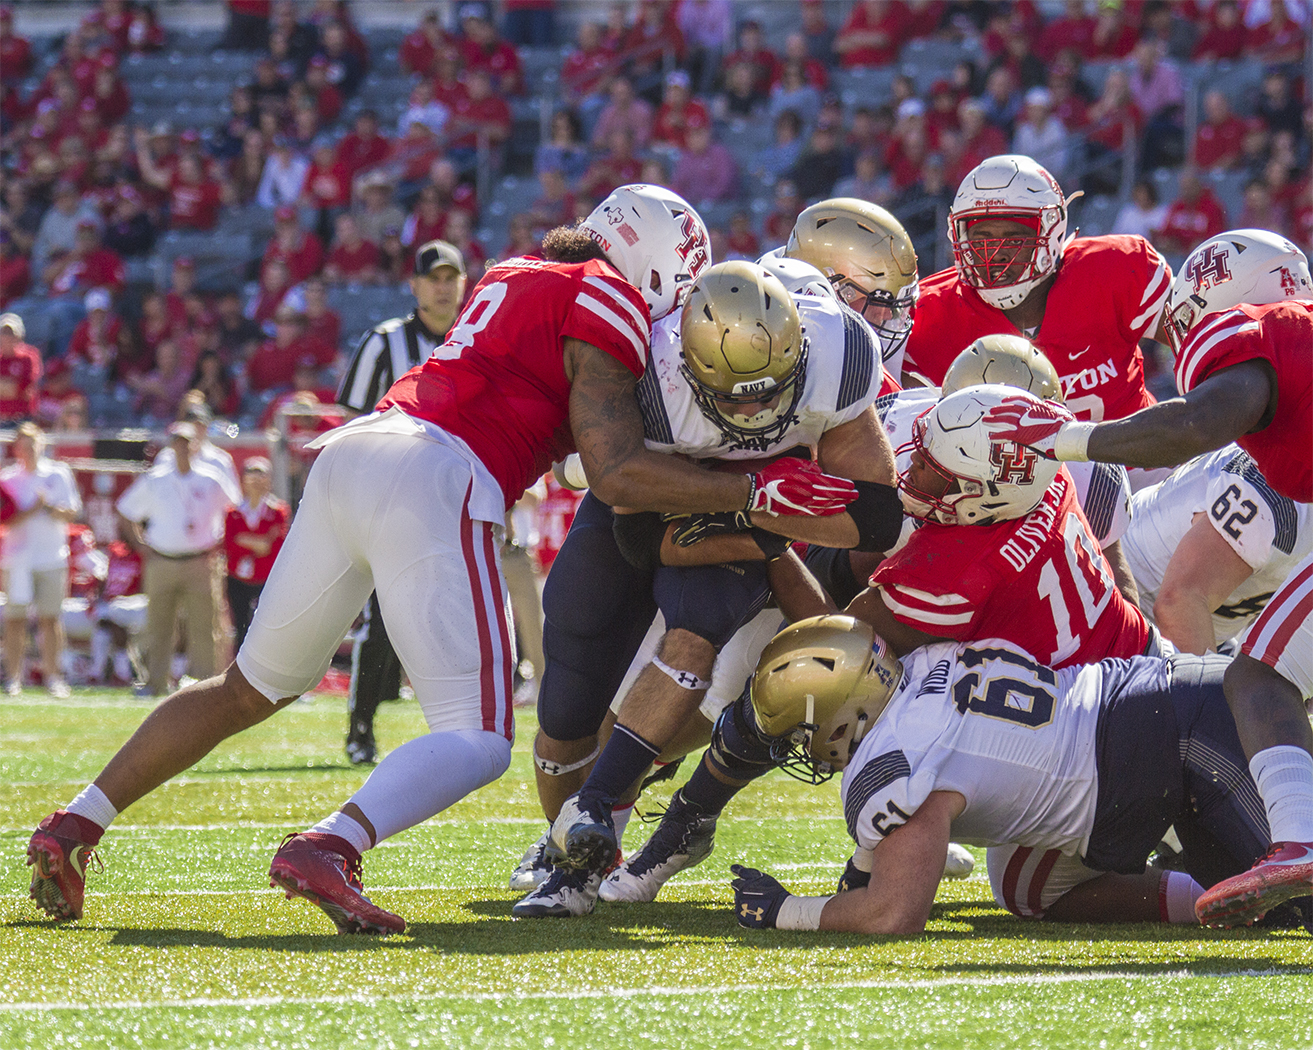 The Cougars' defense was key in their 49-36 win over the Midshipmen in 2018 and again will be crucial against No. 24 Navy on Saturday at TDECU Stadium. | File photo